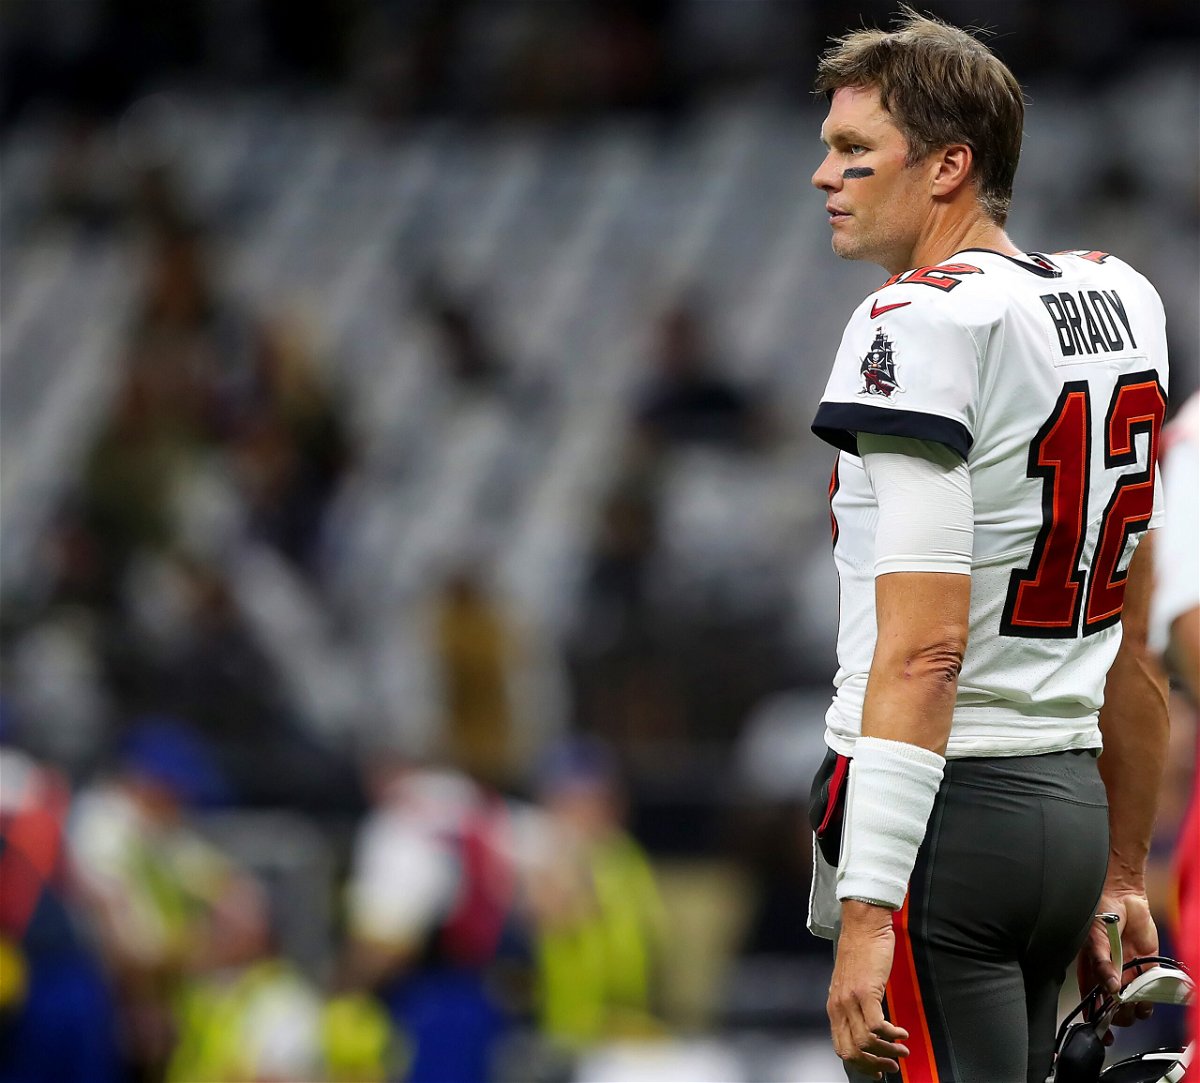 <i>Cliff Welch/Icon Sportswire/Getty Images</i><br/>Brady looks towards the sidelines during the Tampa Bay Buccaneers vs. New Orleans Saints game on September 18.